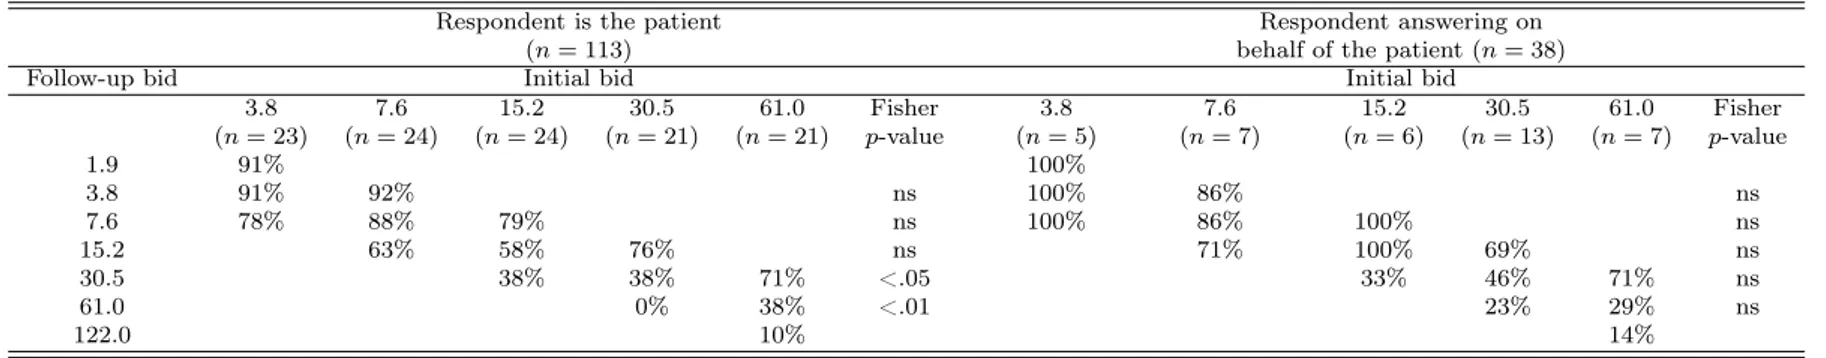 Table 1.a: Bid acceptance rate for the earlier alleviation of flu symptoms by one day (n = 151)